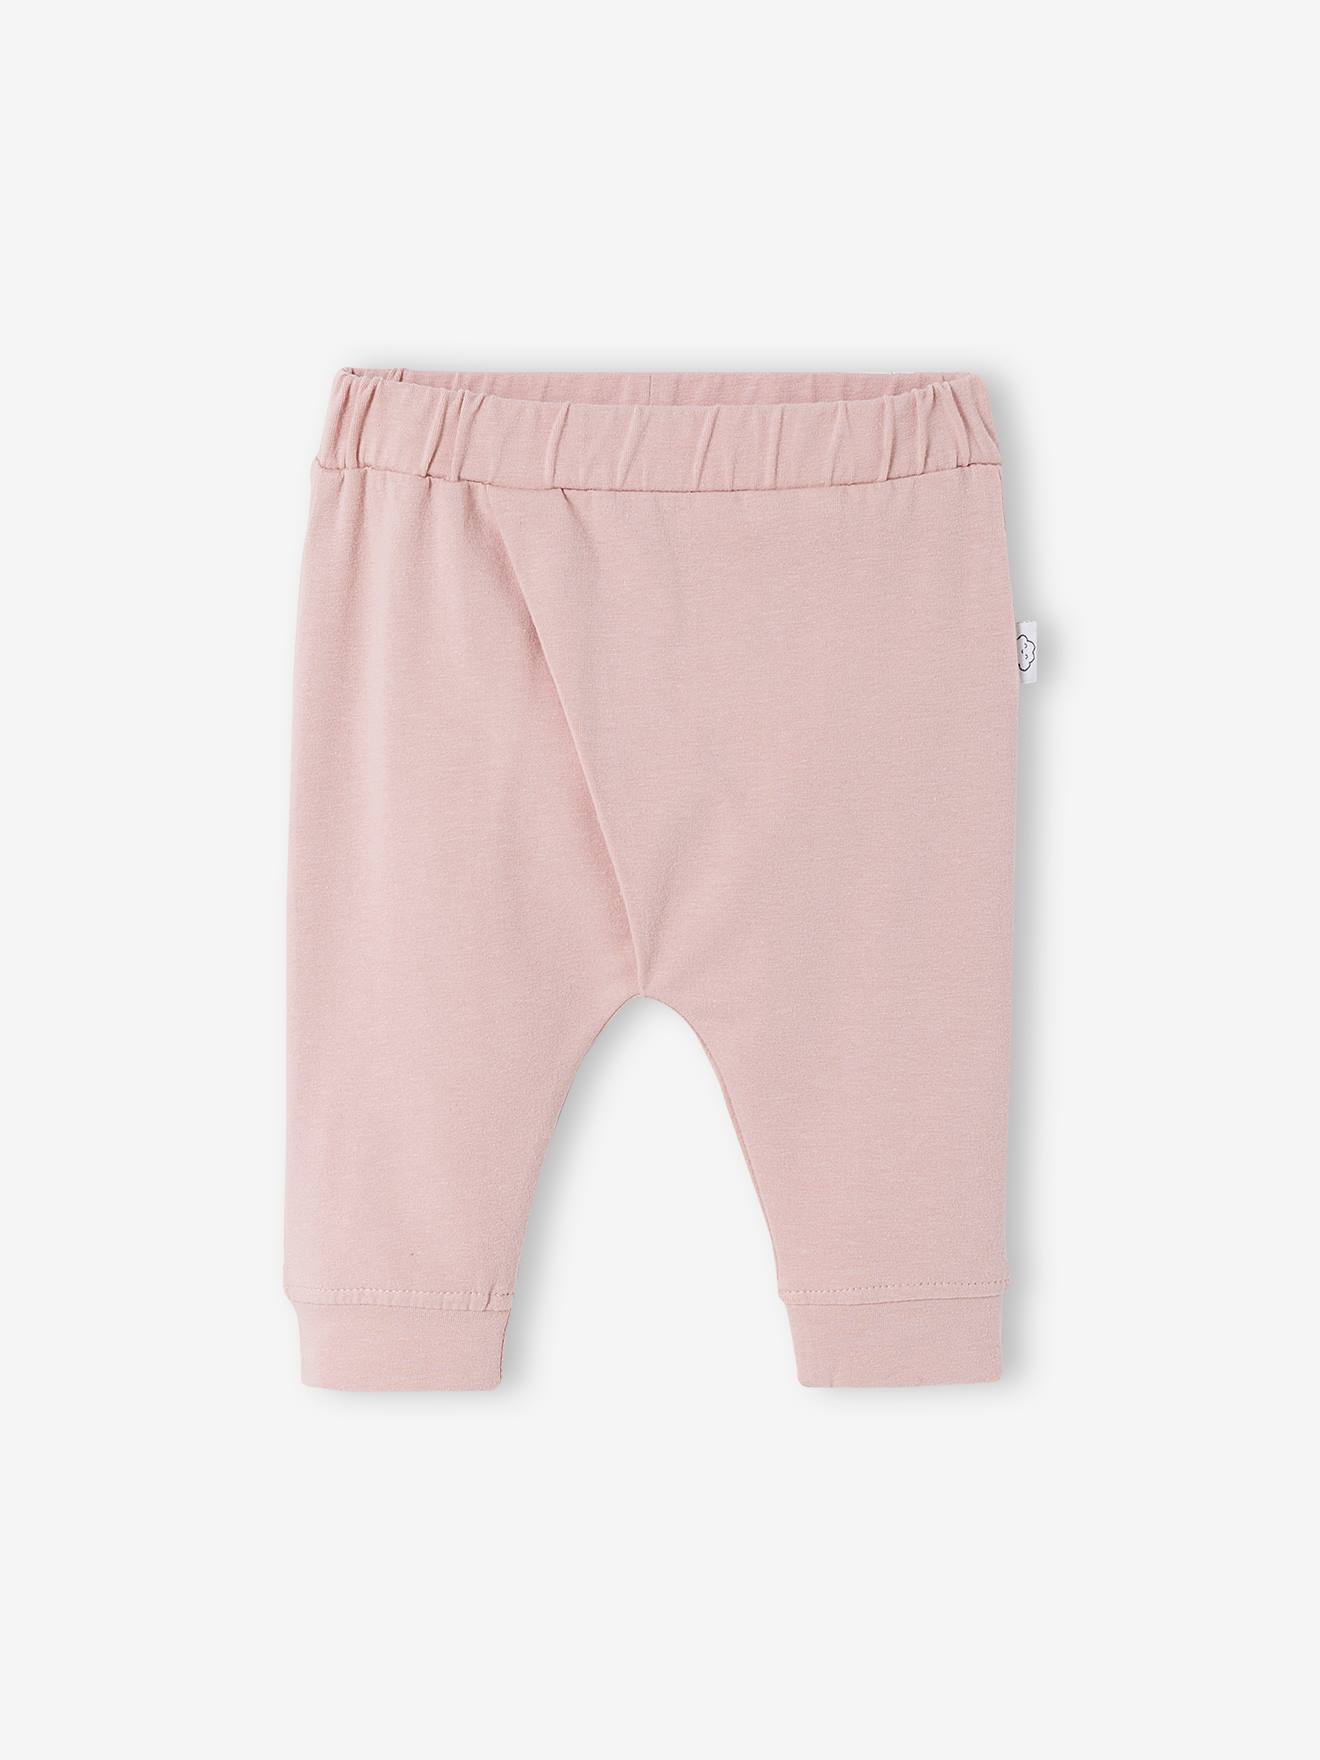 Soft Jersey Knit Trousers for Newborn Babies pink medium solid